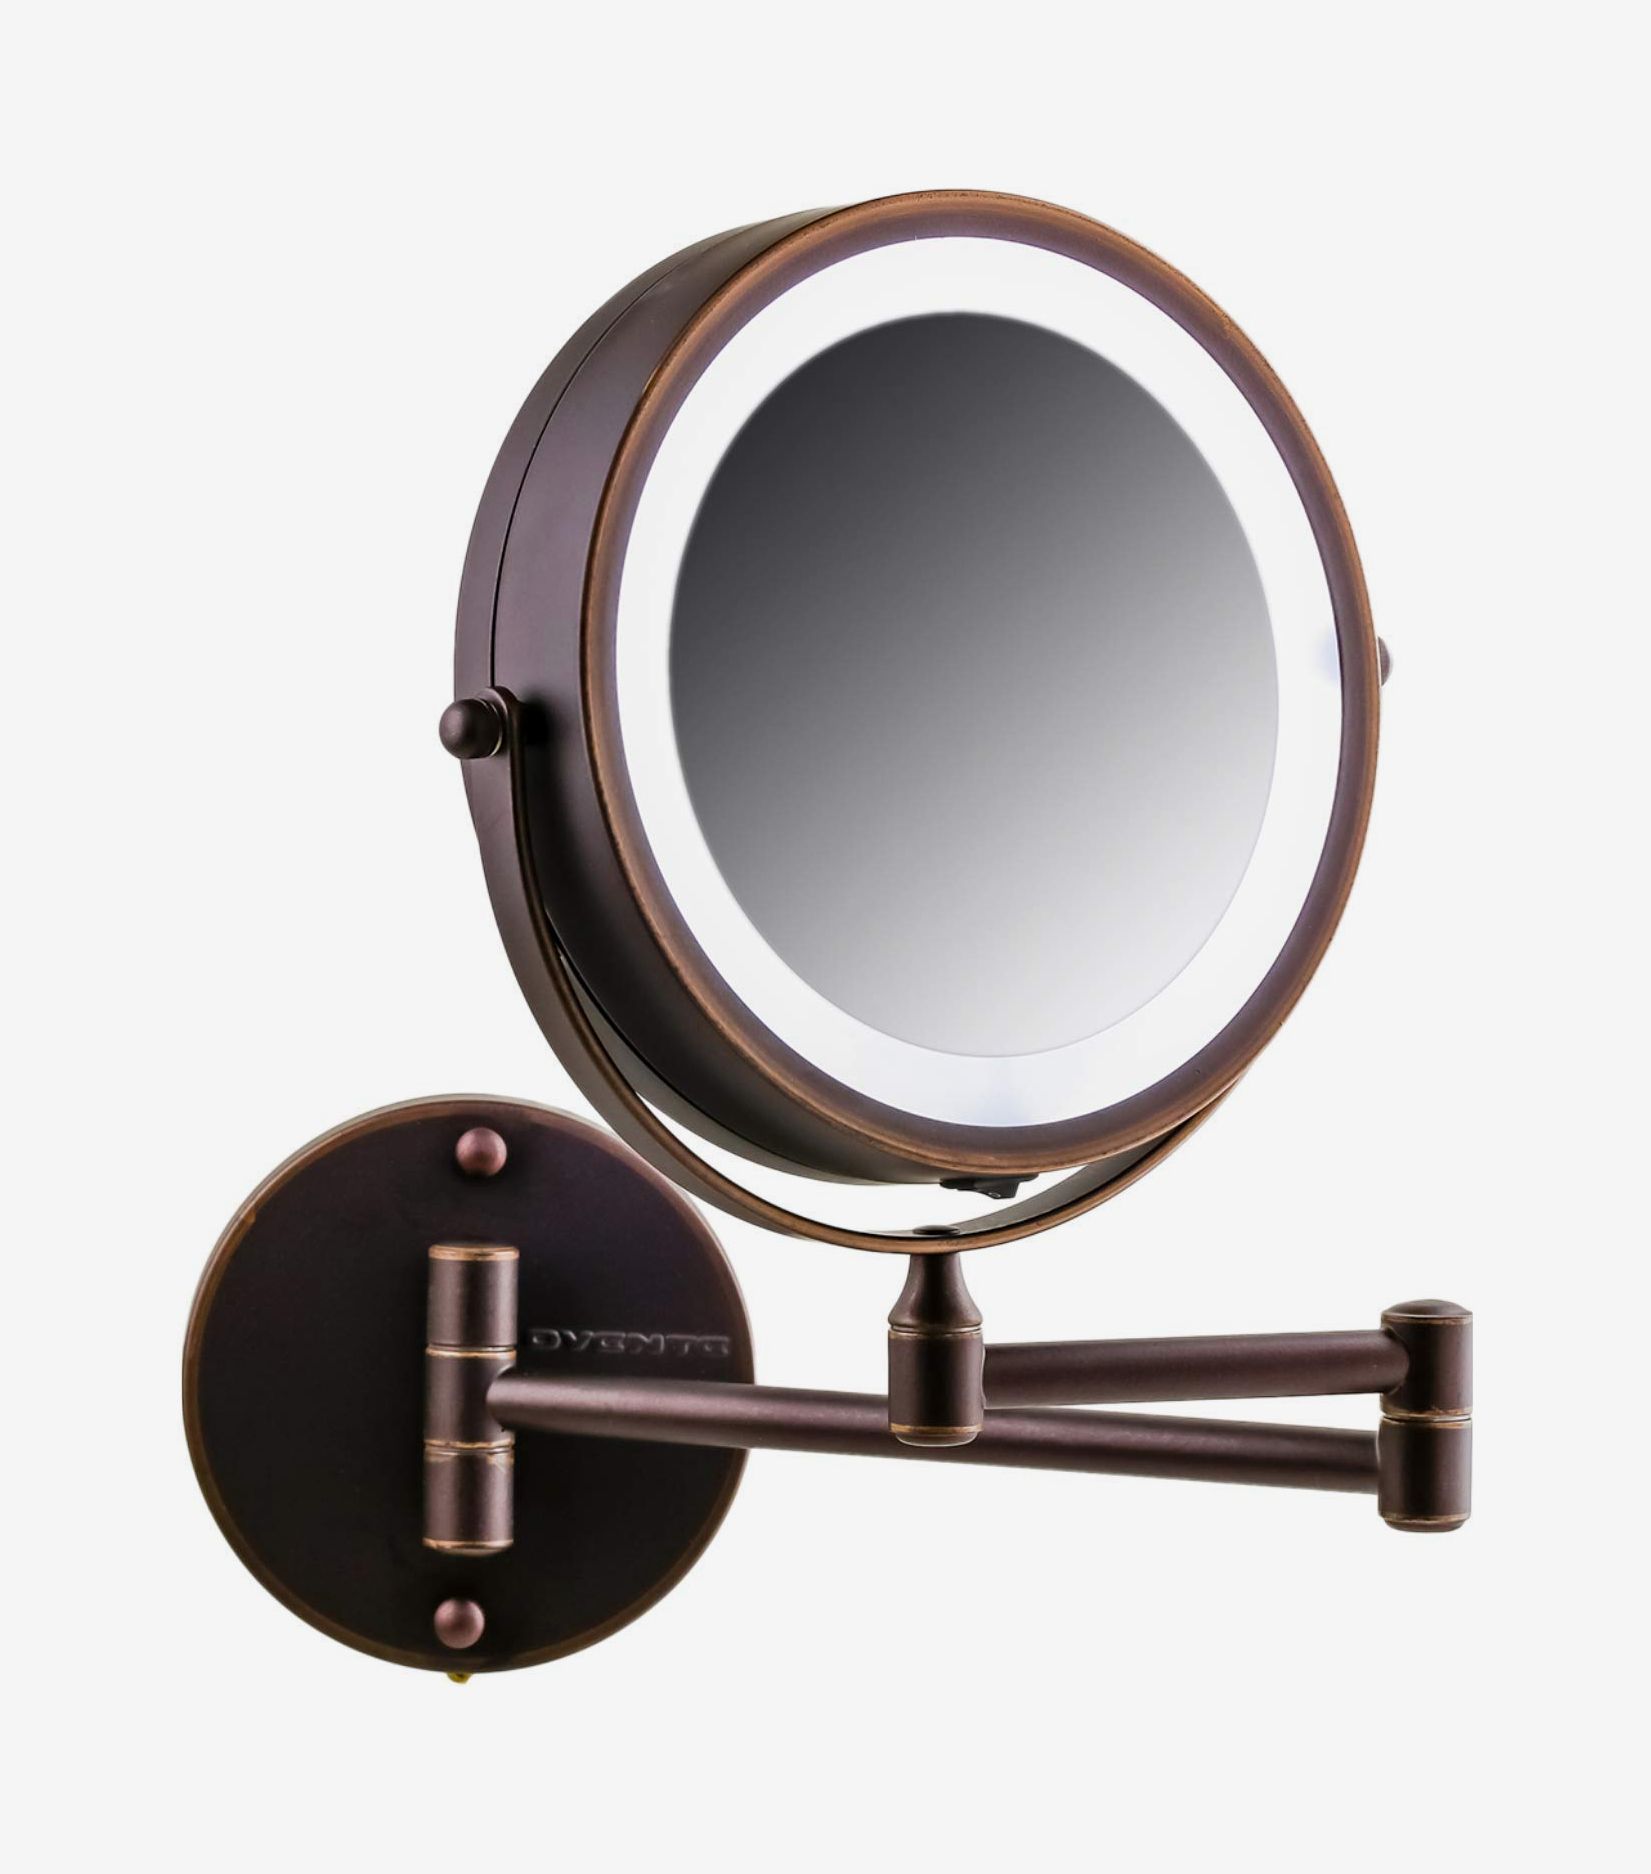 14 Best Lighted Makeup Mirrors 2022, Best Lighted Makeup Mirror 5x Magnification